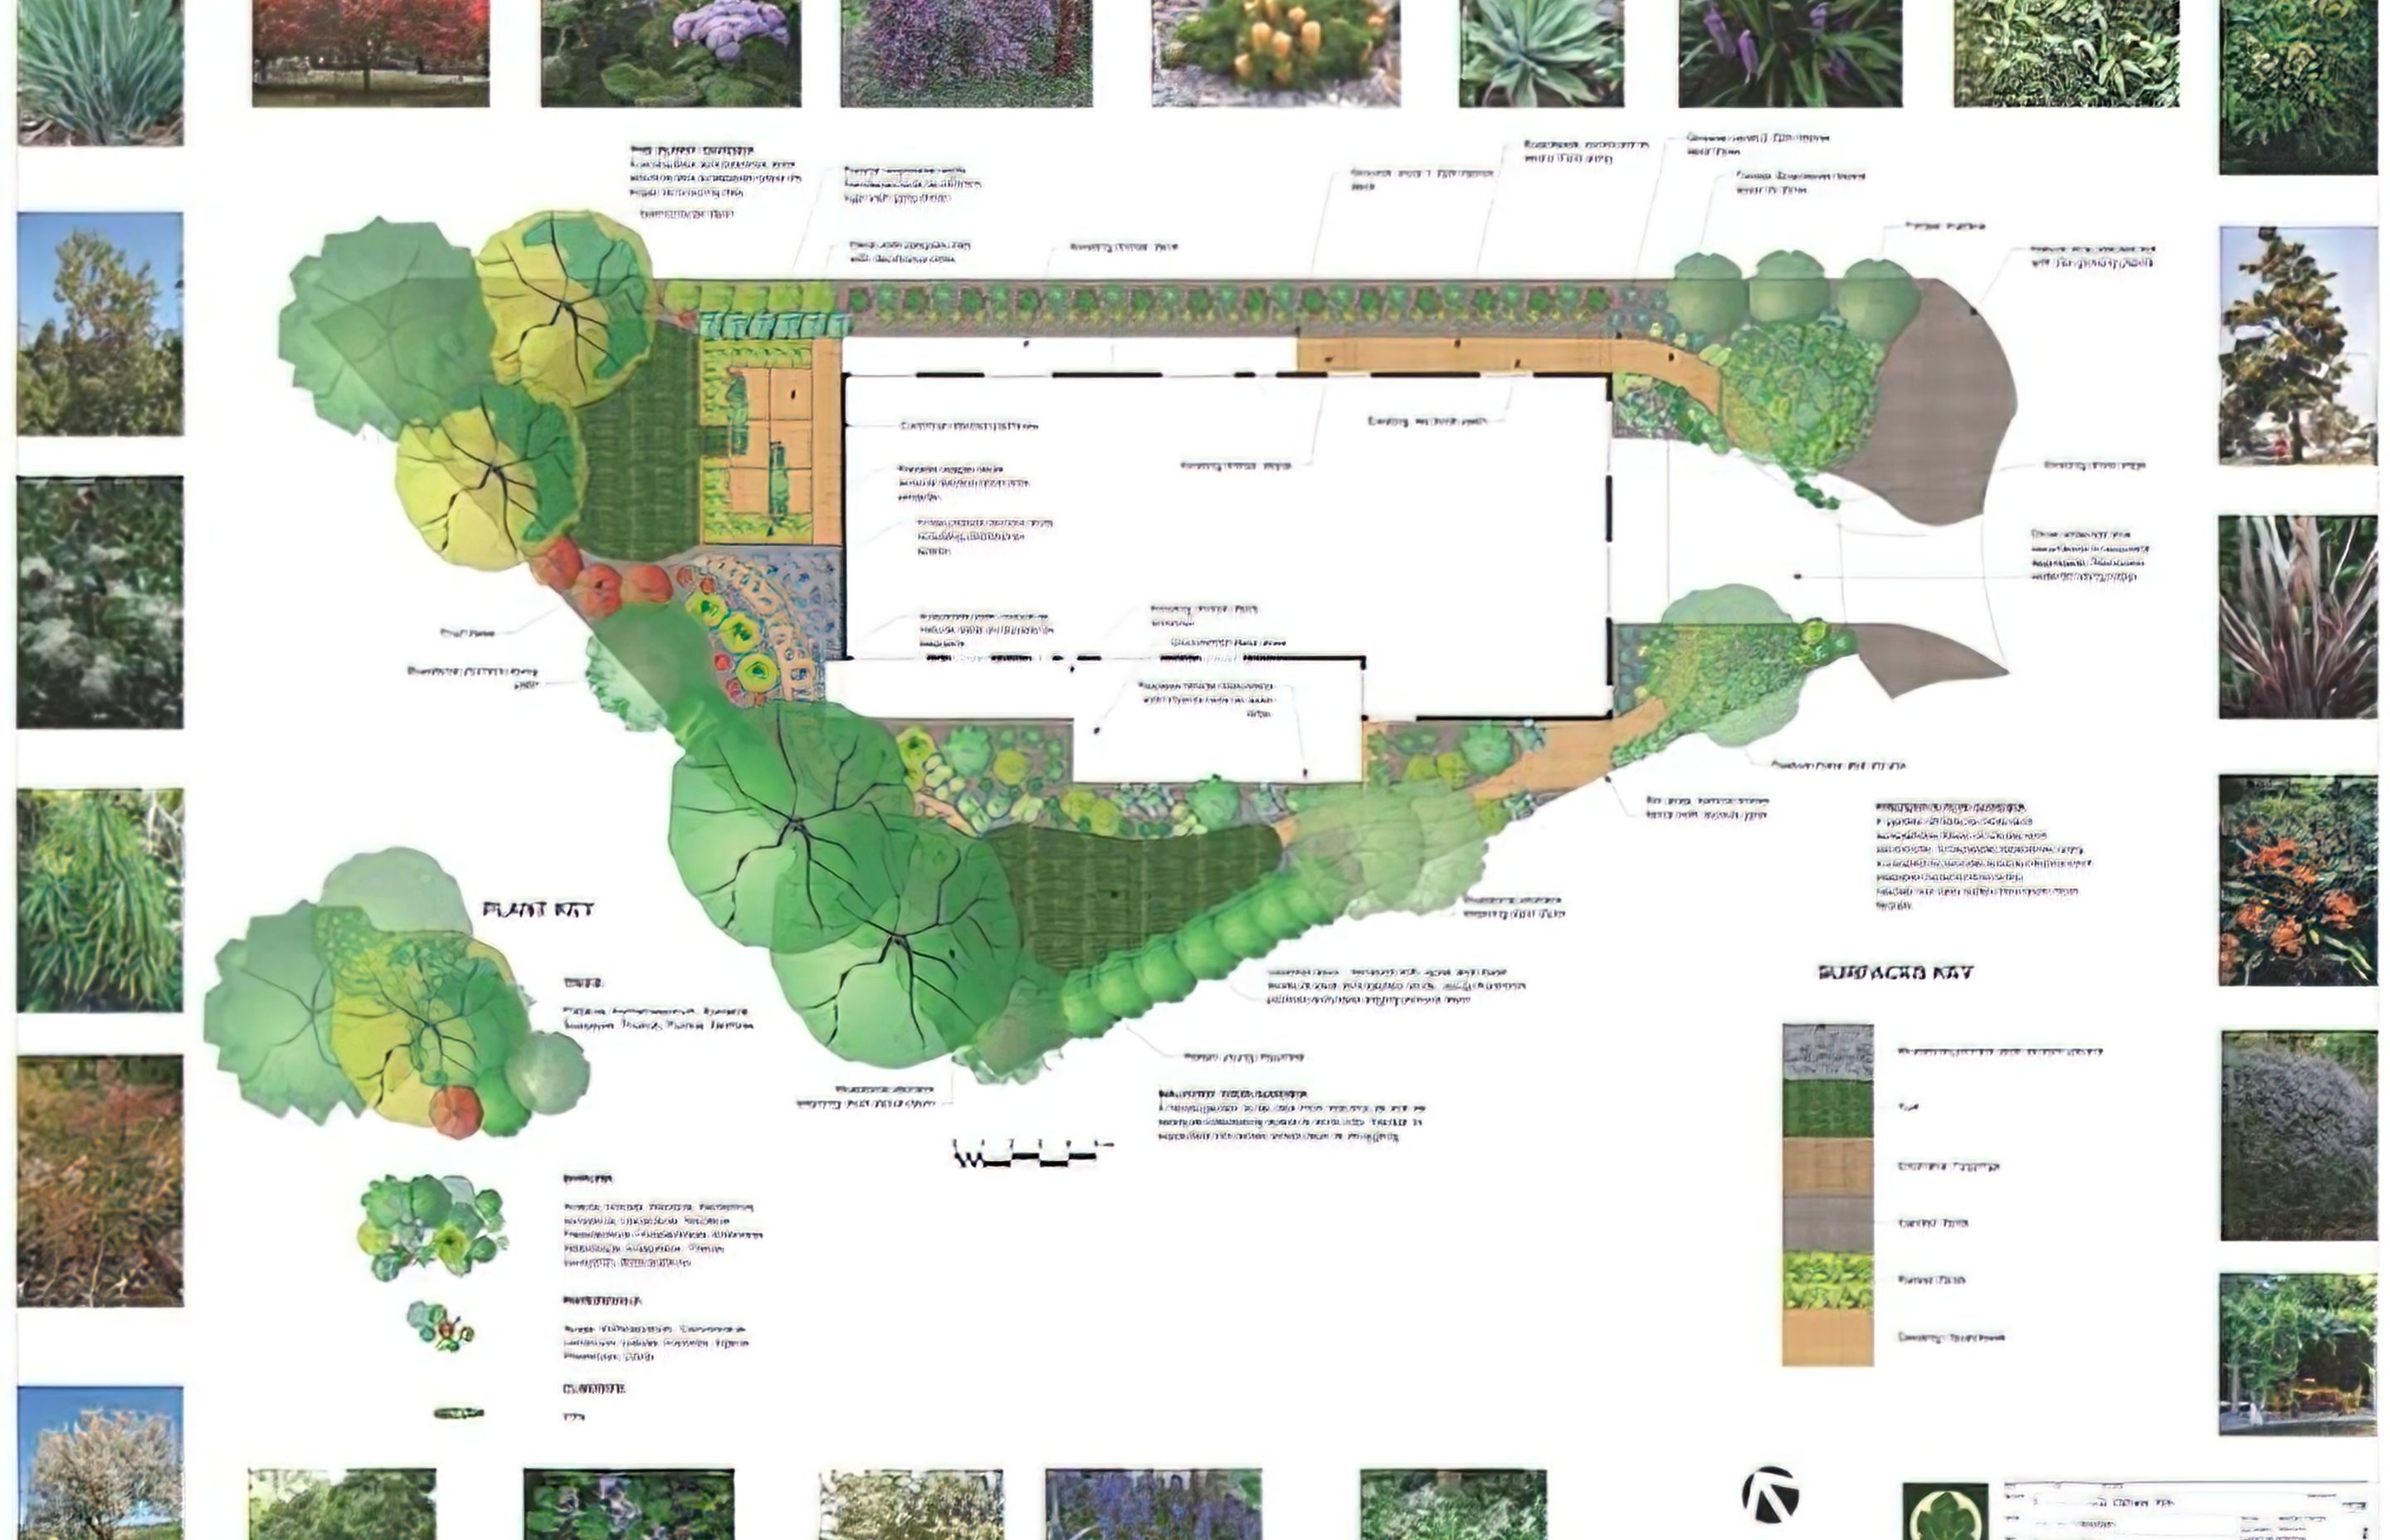 Eltham North Concept Plan for a new garden